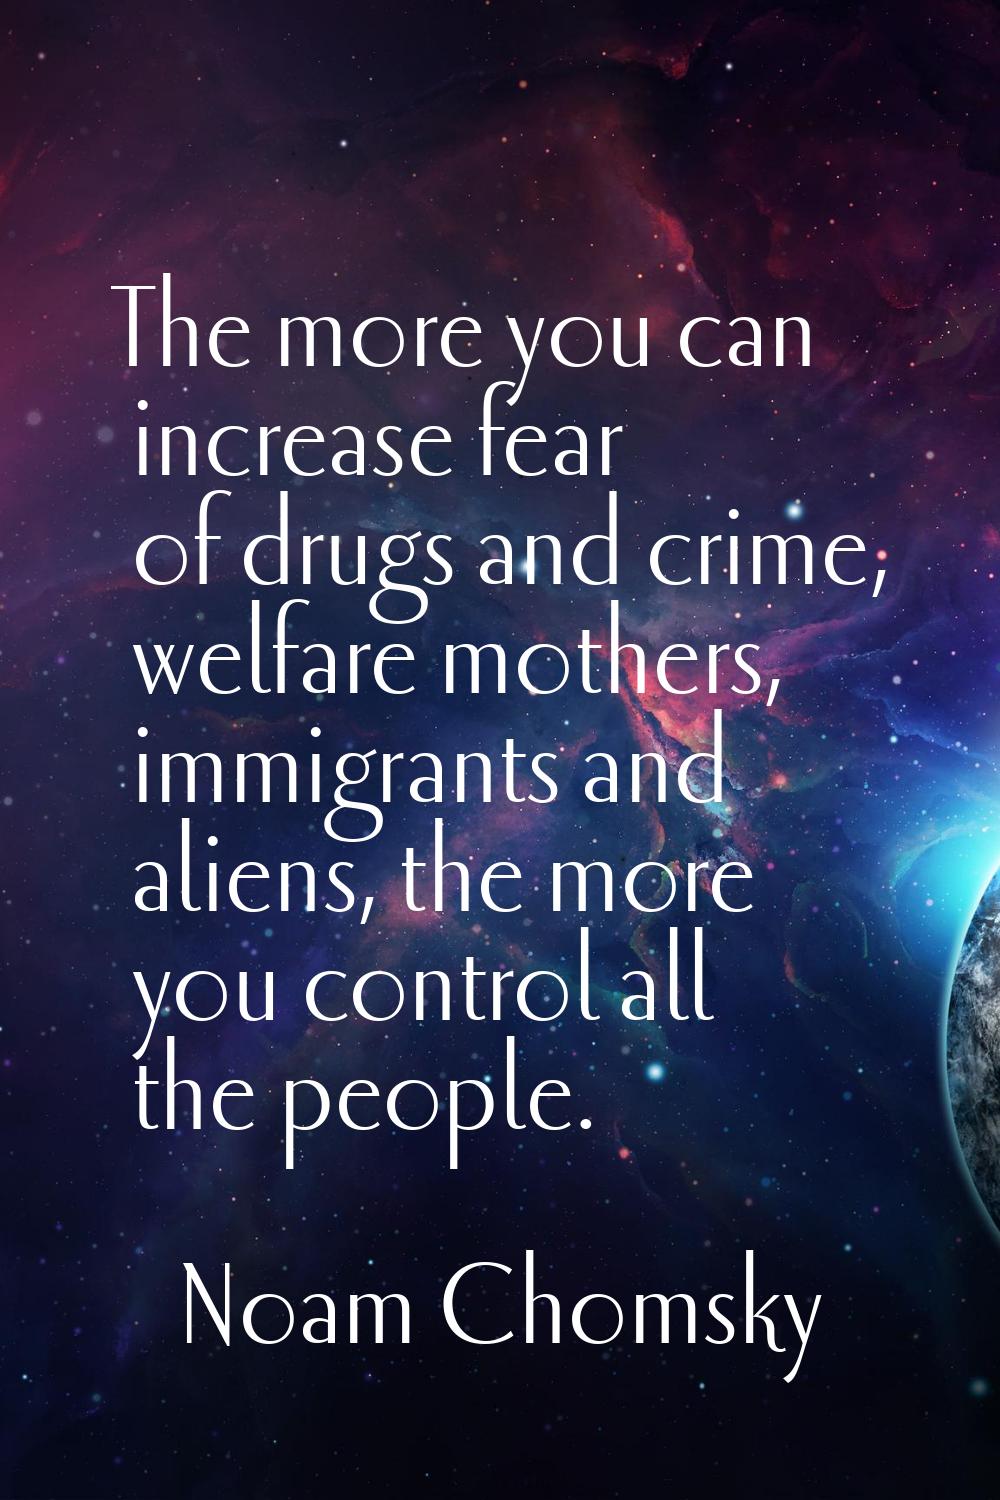 The more you can increase fear of drugs and crime, welfare mothers, immigrants and aliens, the more